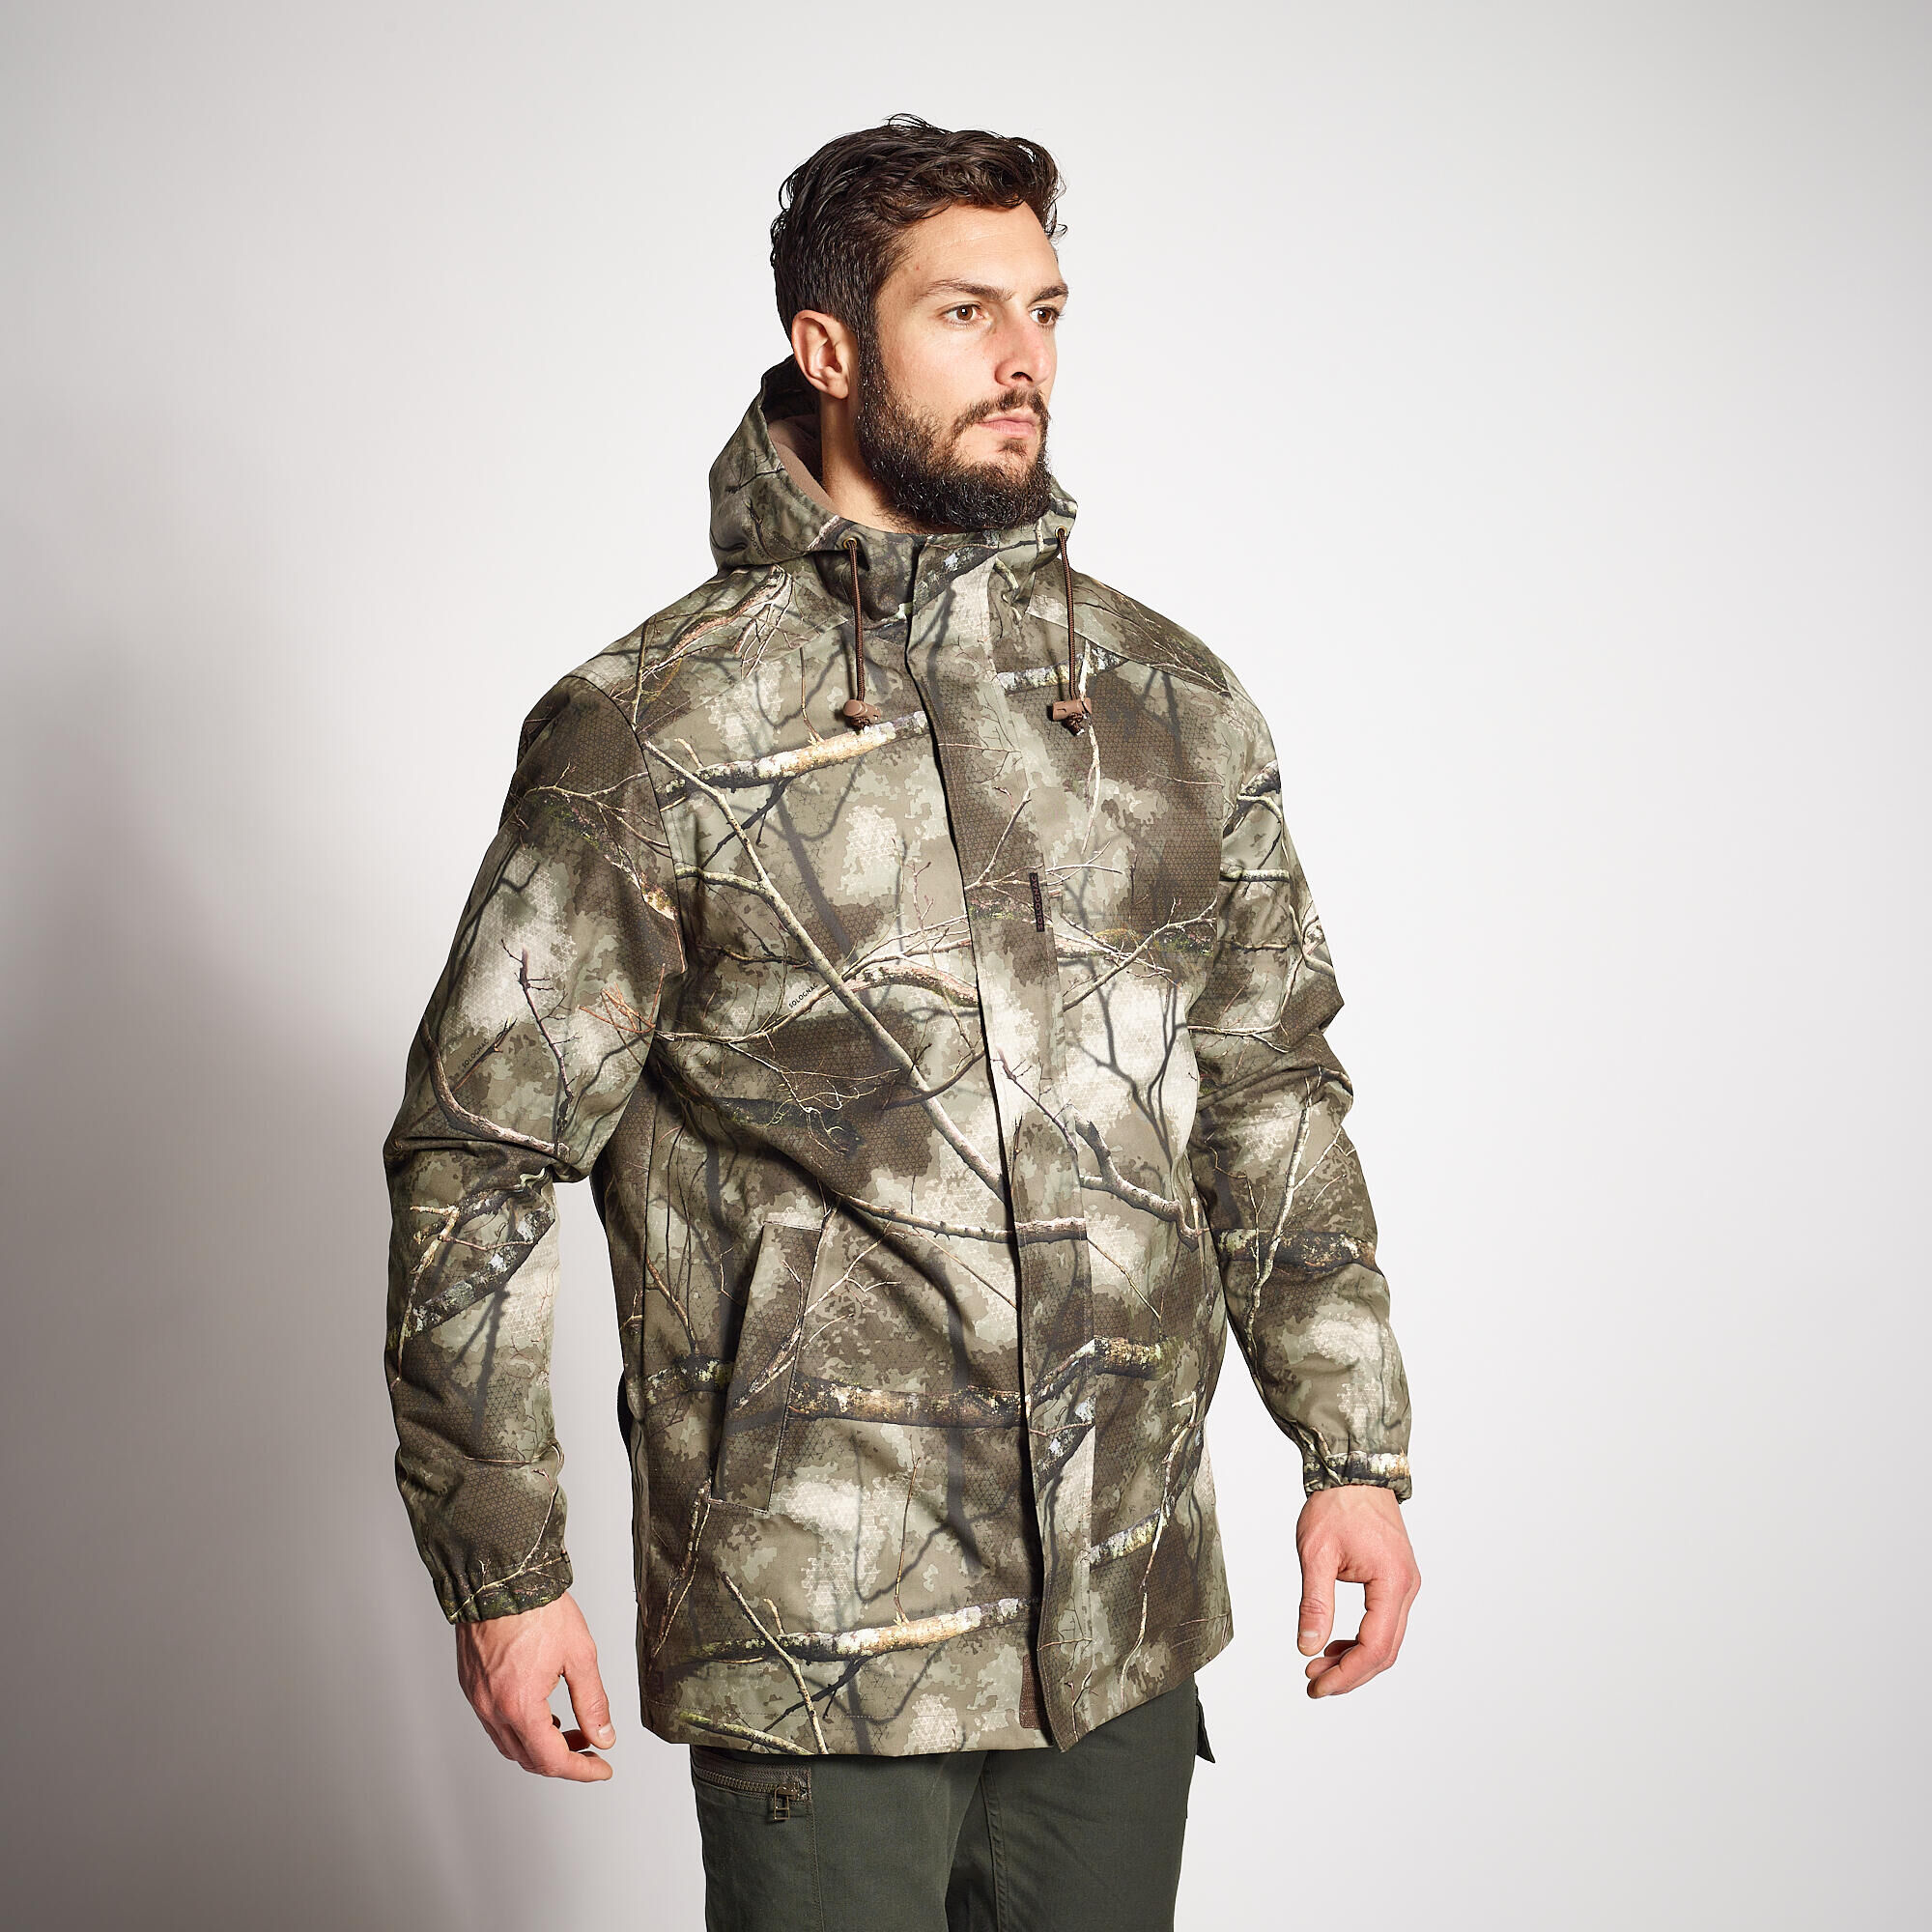 Stay Warm & Dry with Our Fishing Coats & Jackets